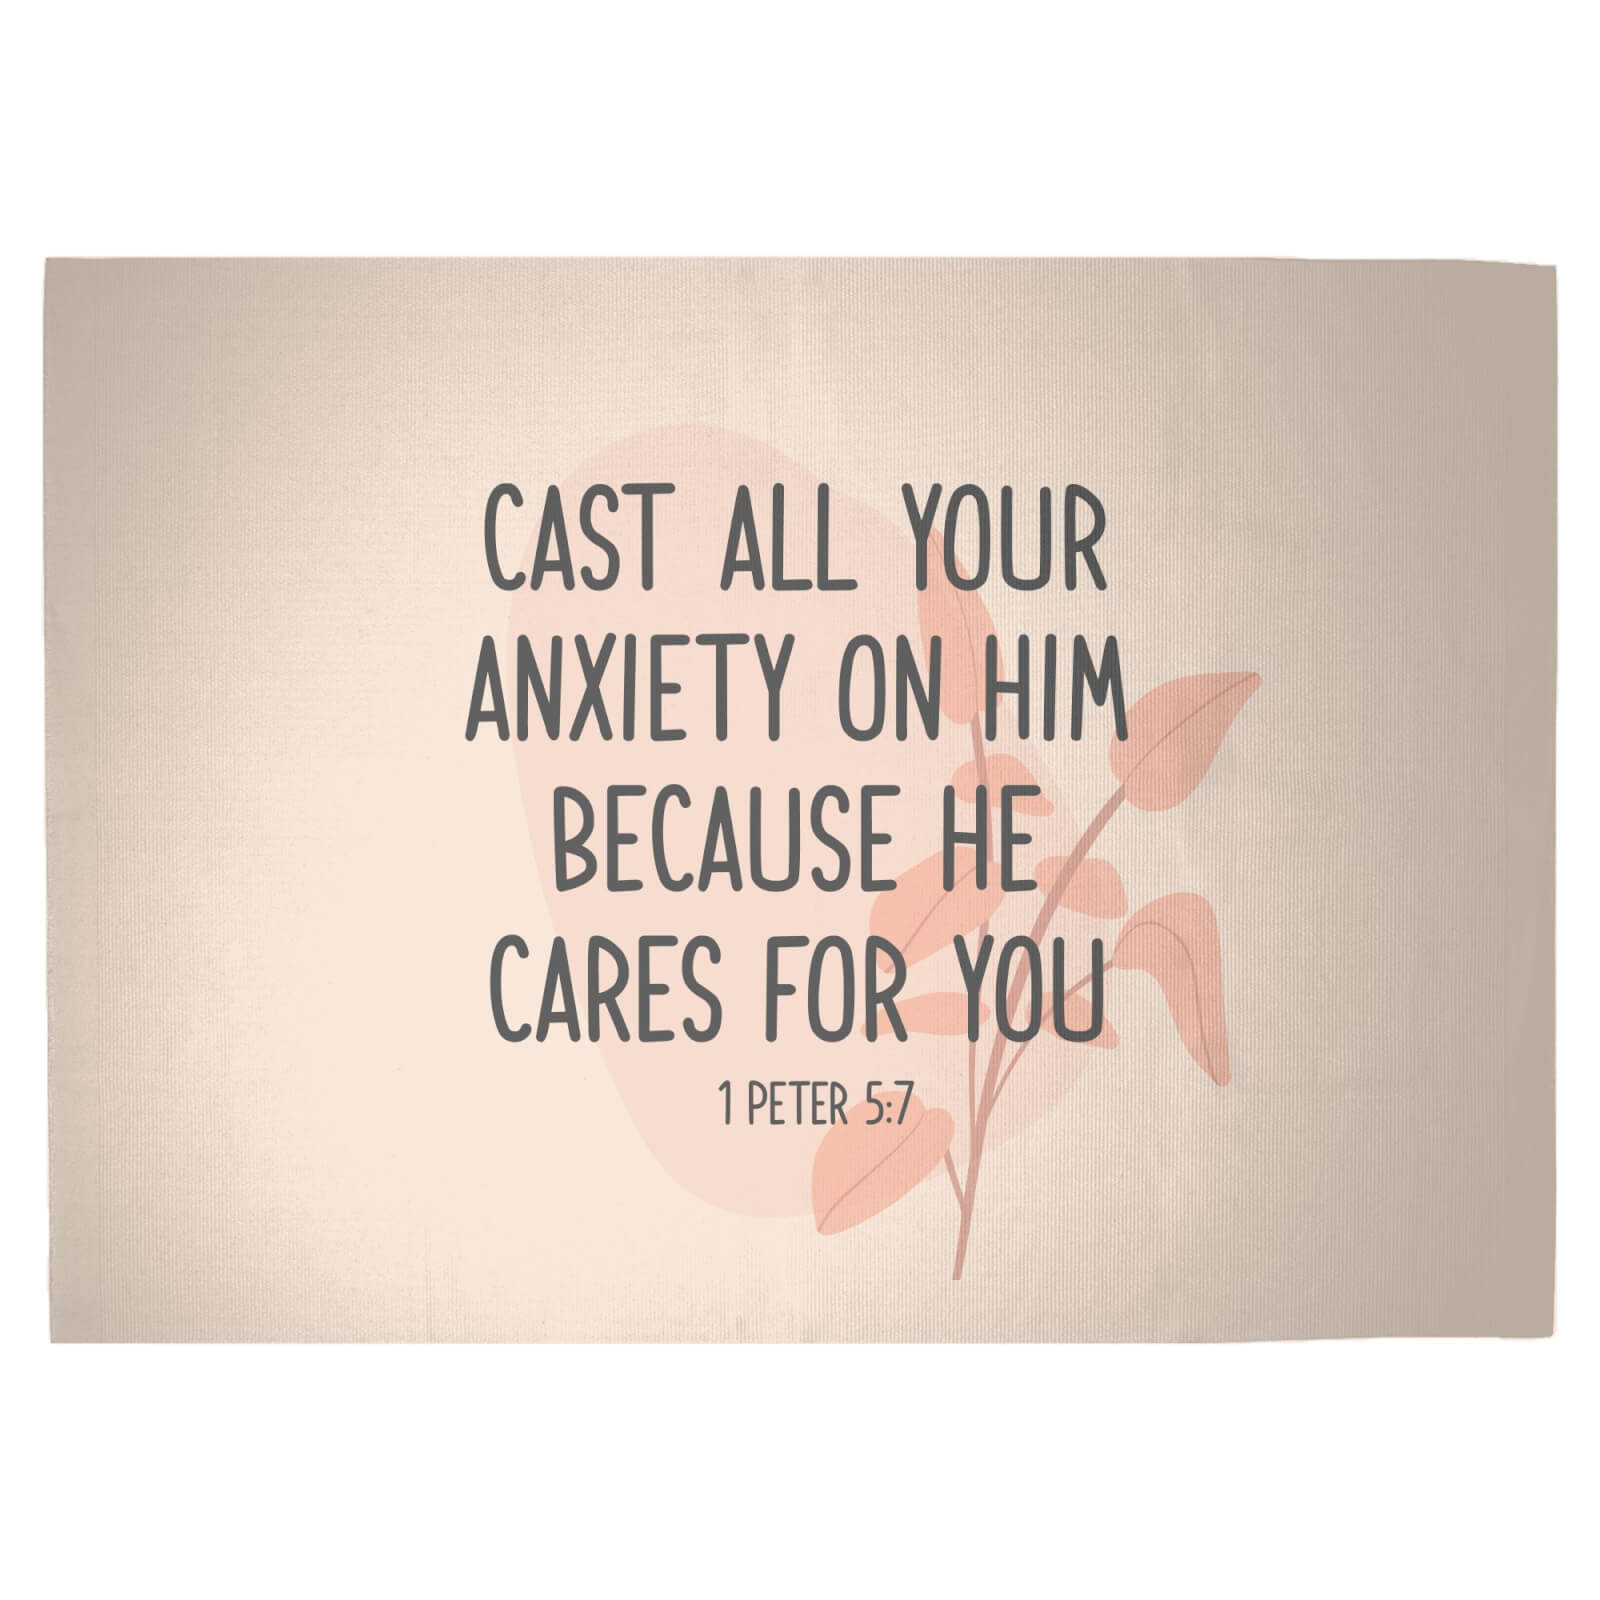 Cast All Your Anxiety On Him Because He Cares For You Woven Rug - Large